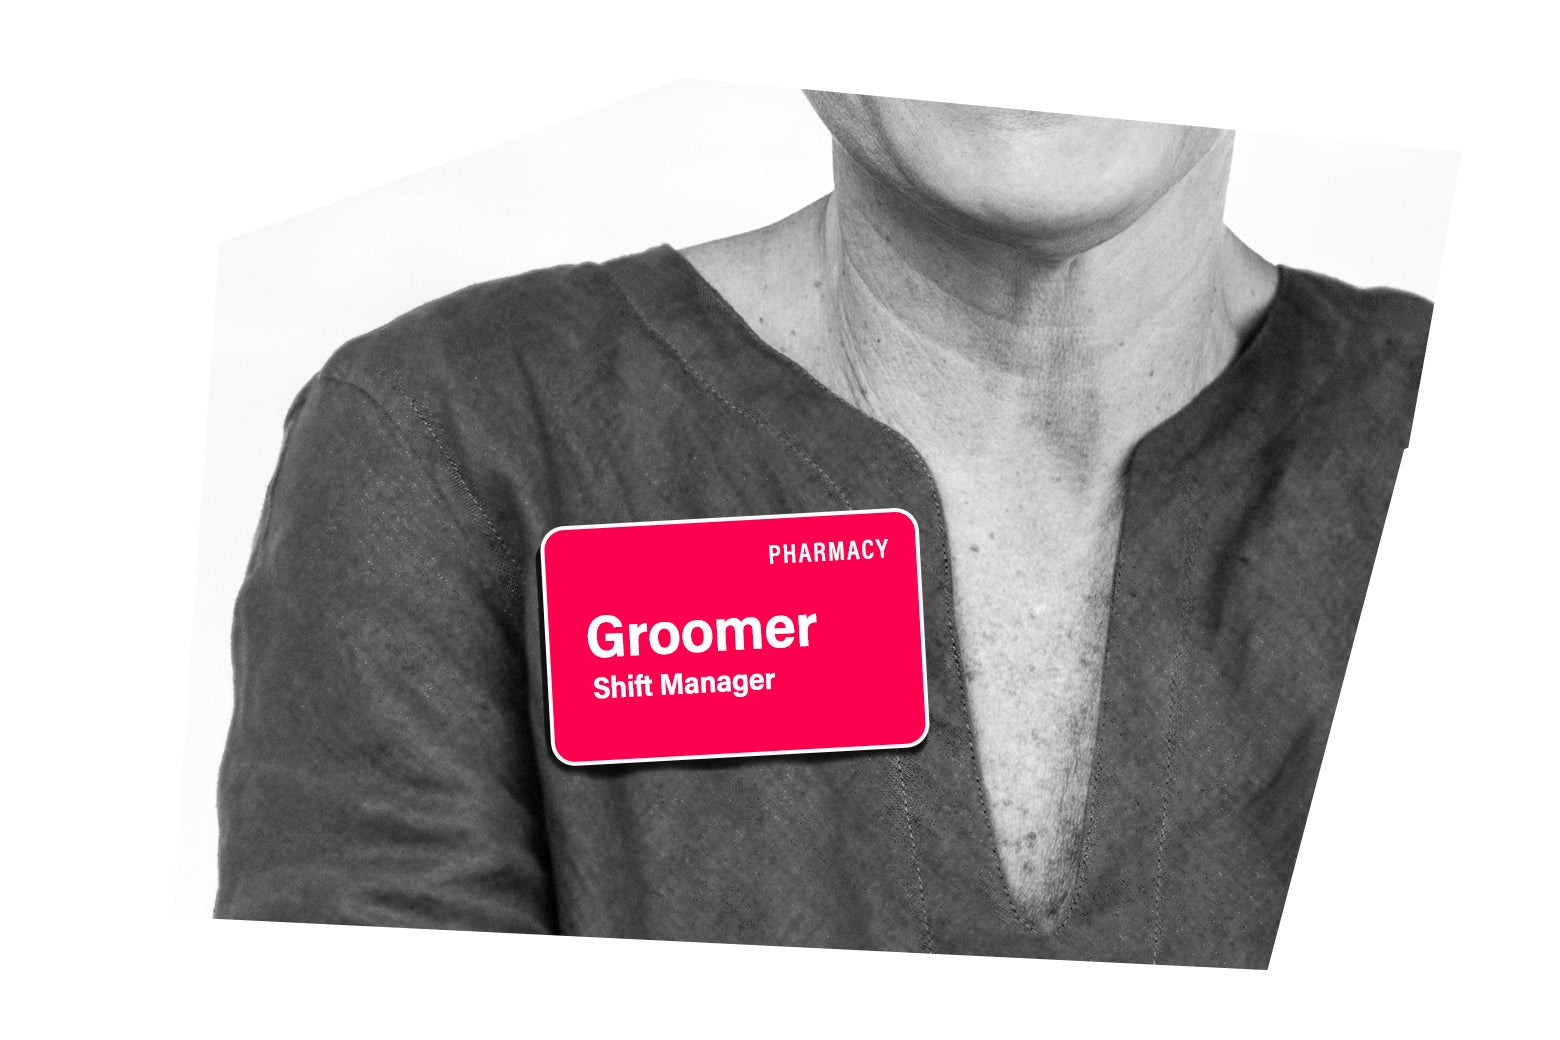 A person wearing a shift manager name tag with the word "groomer" on it.